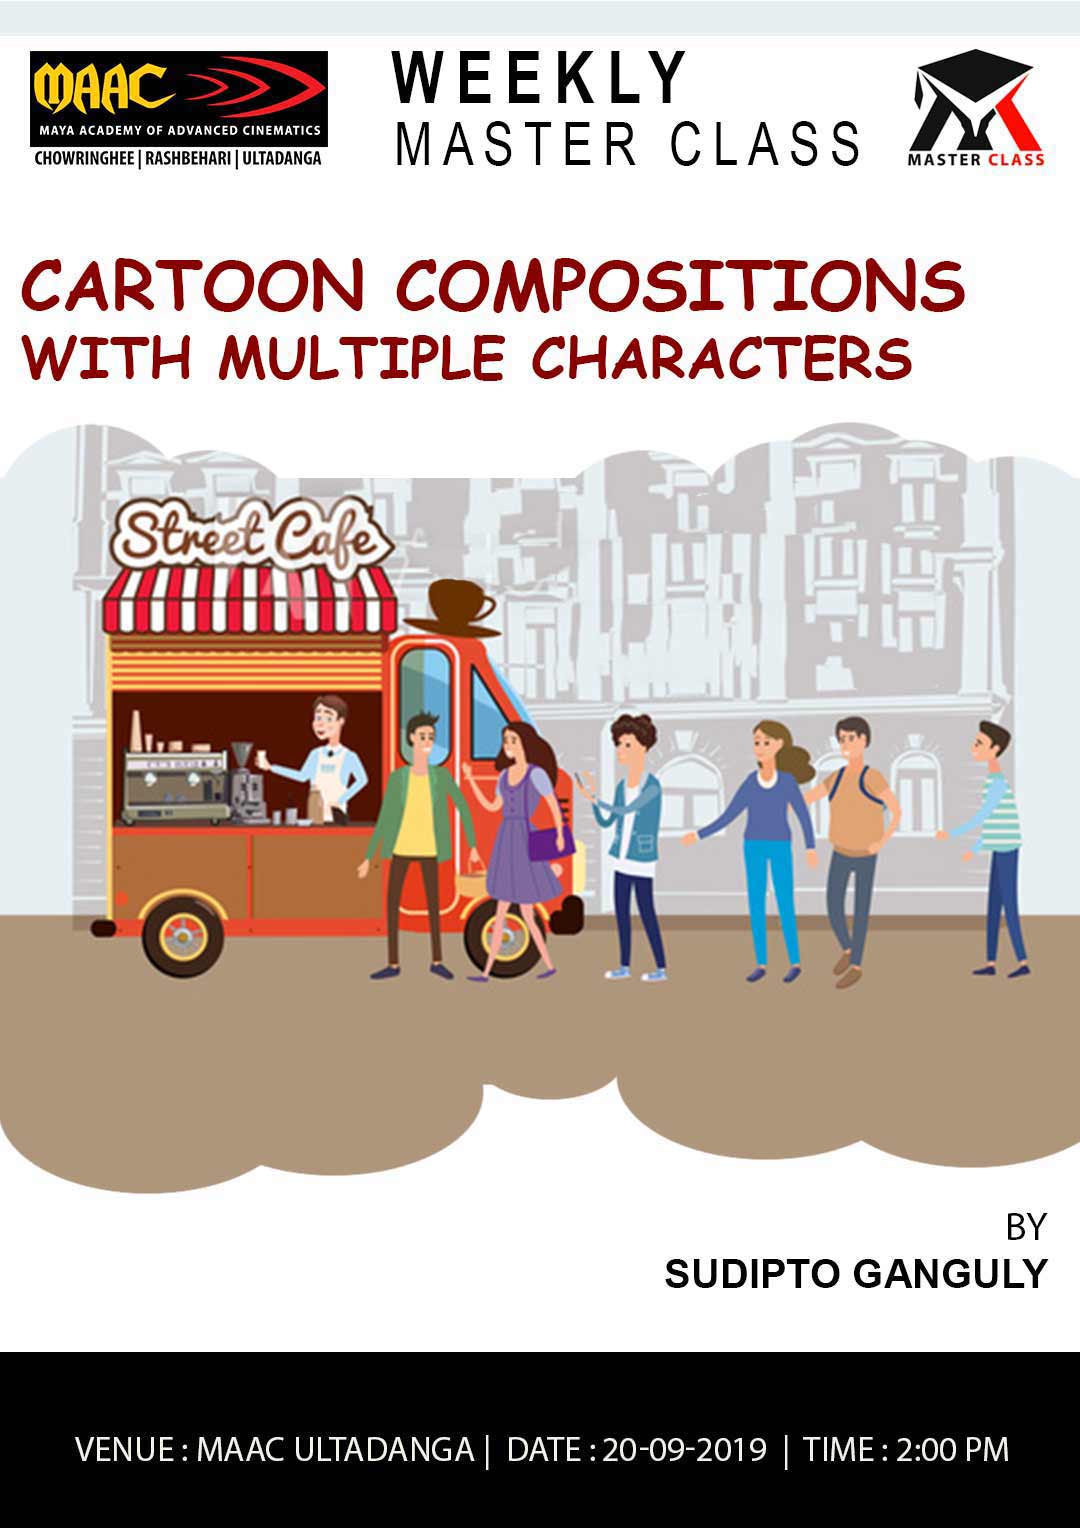 Weekly Master Class on Cartoon Compositions With Multiple Character